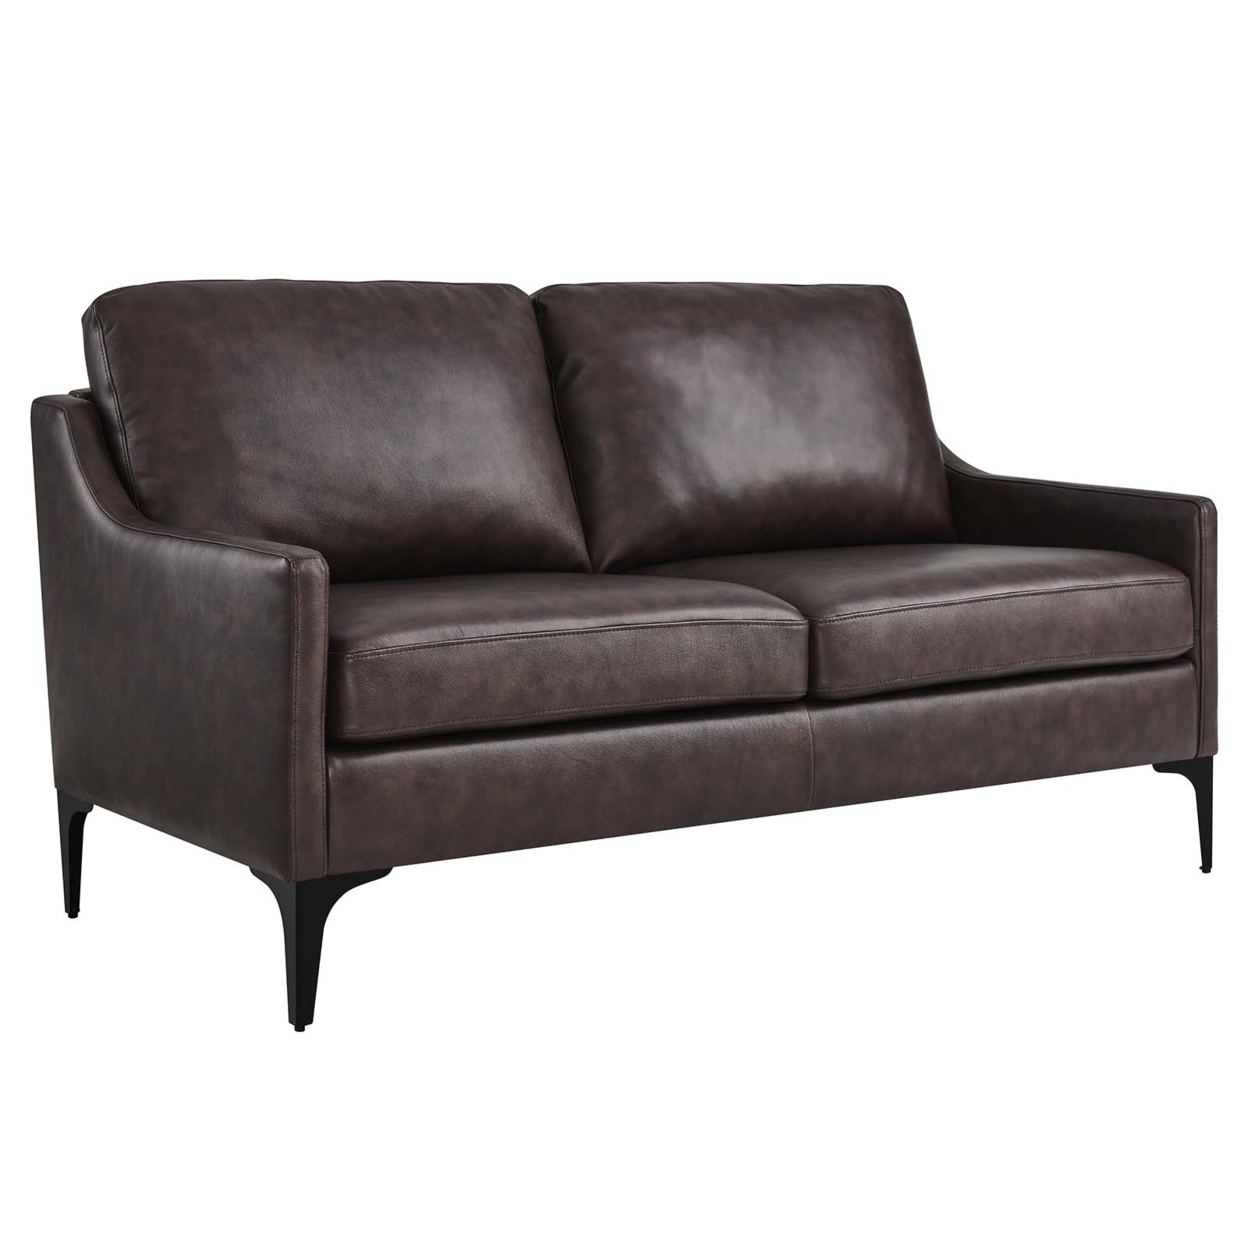 Corland Leather Loveseat, Brown